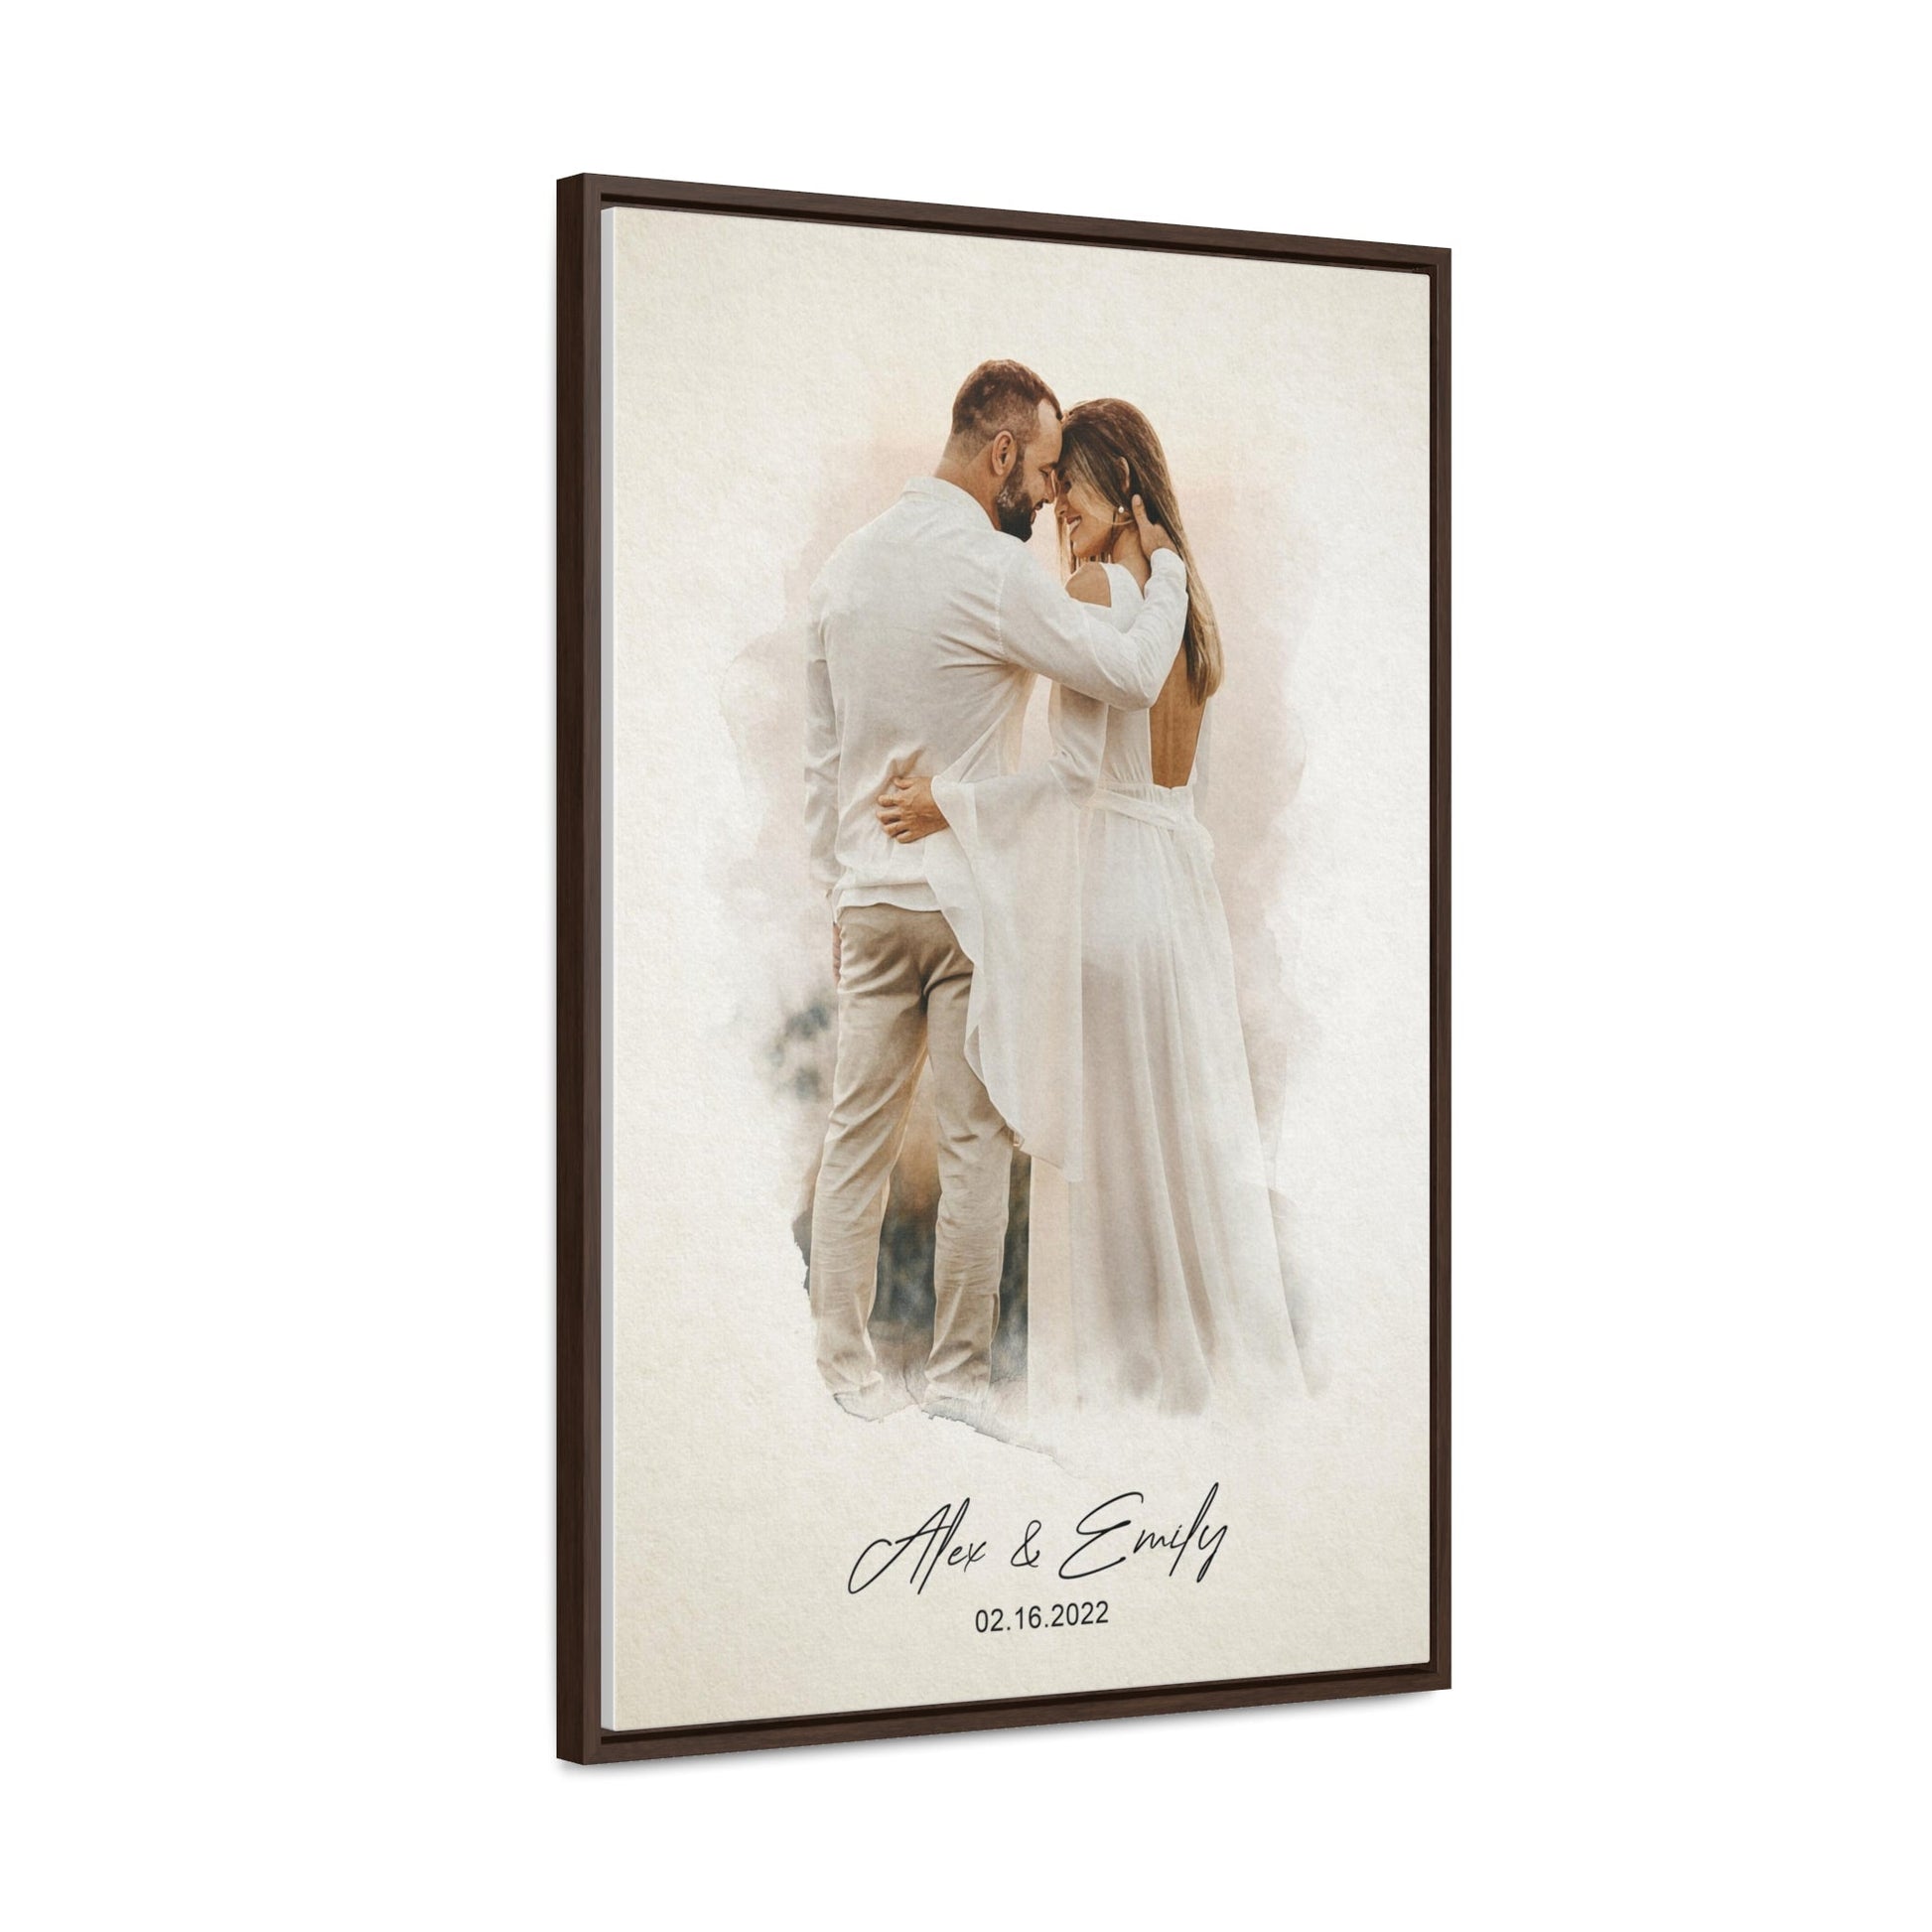 Romantic couple embraced in a loving moment, framed on wall.